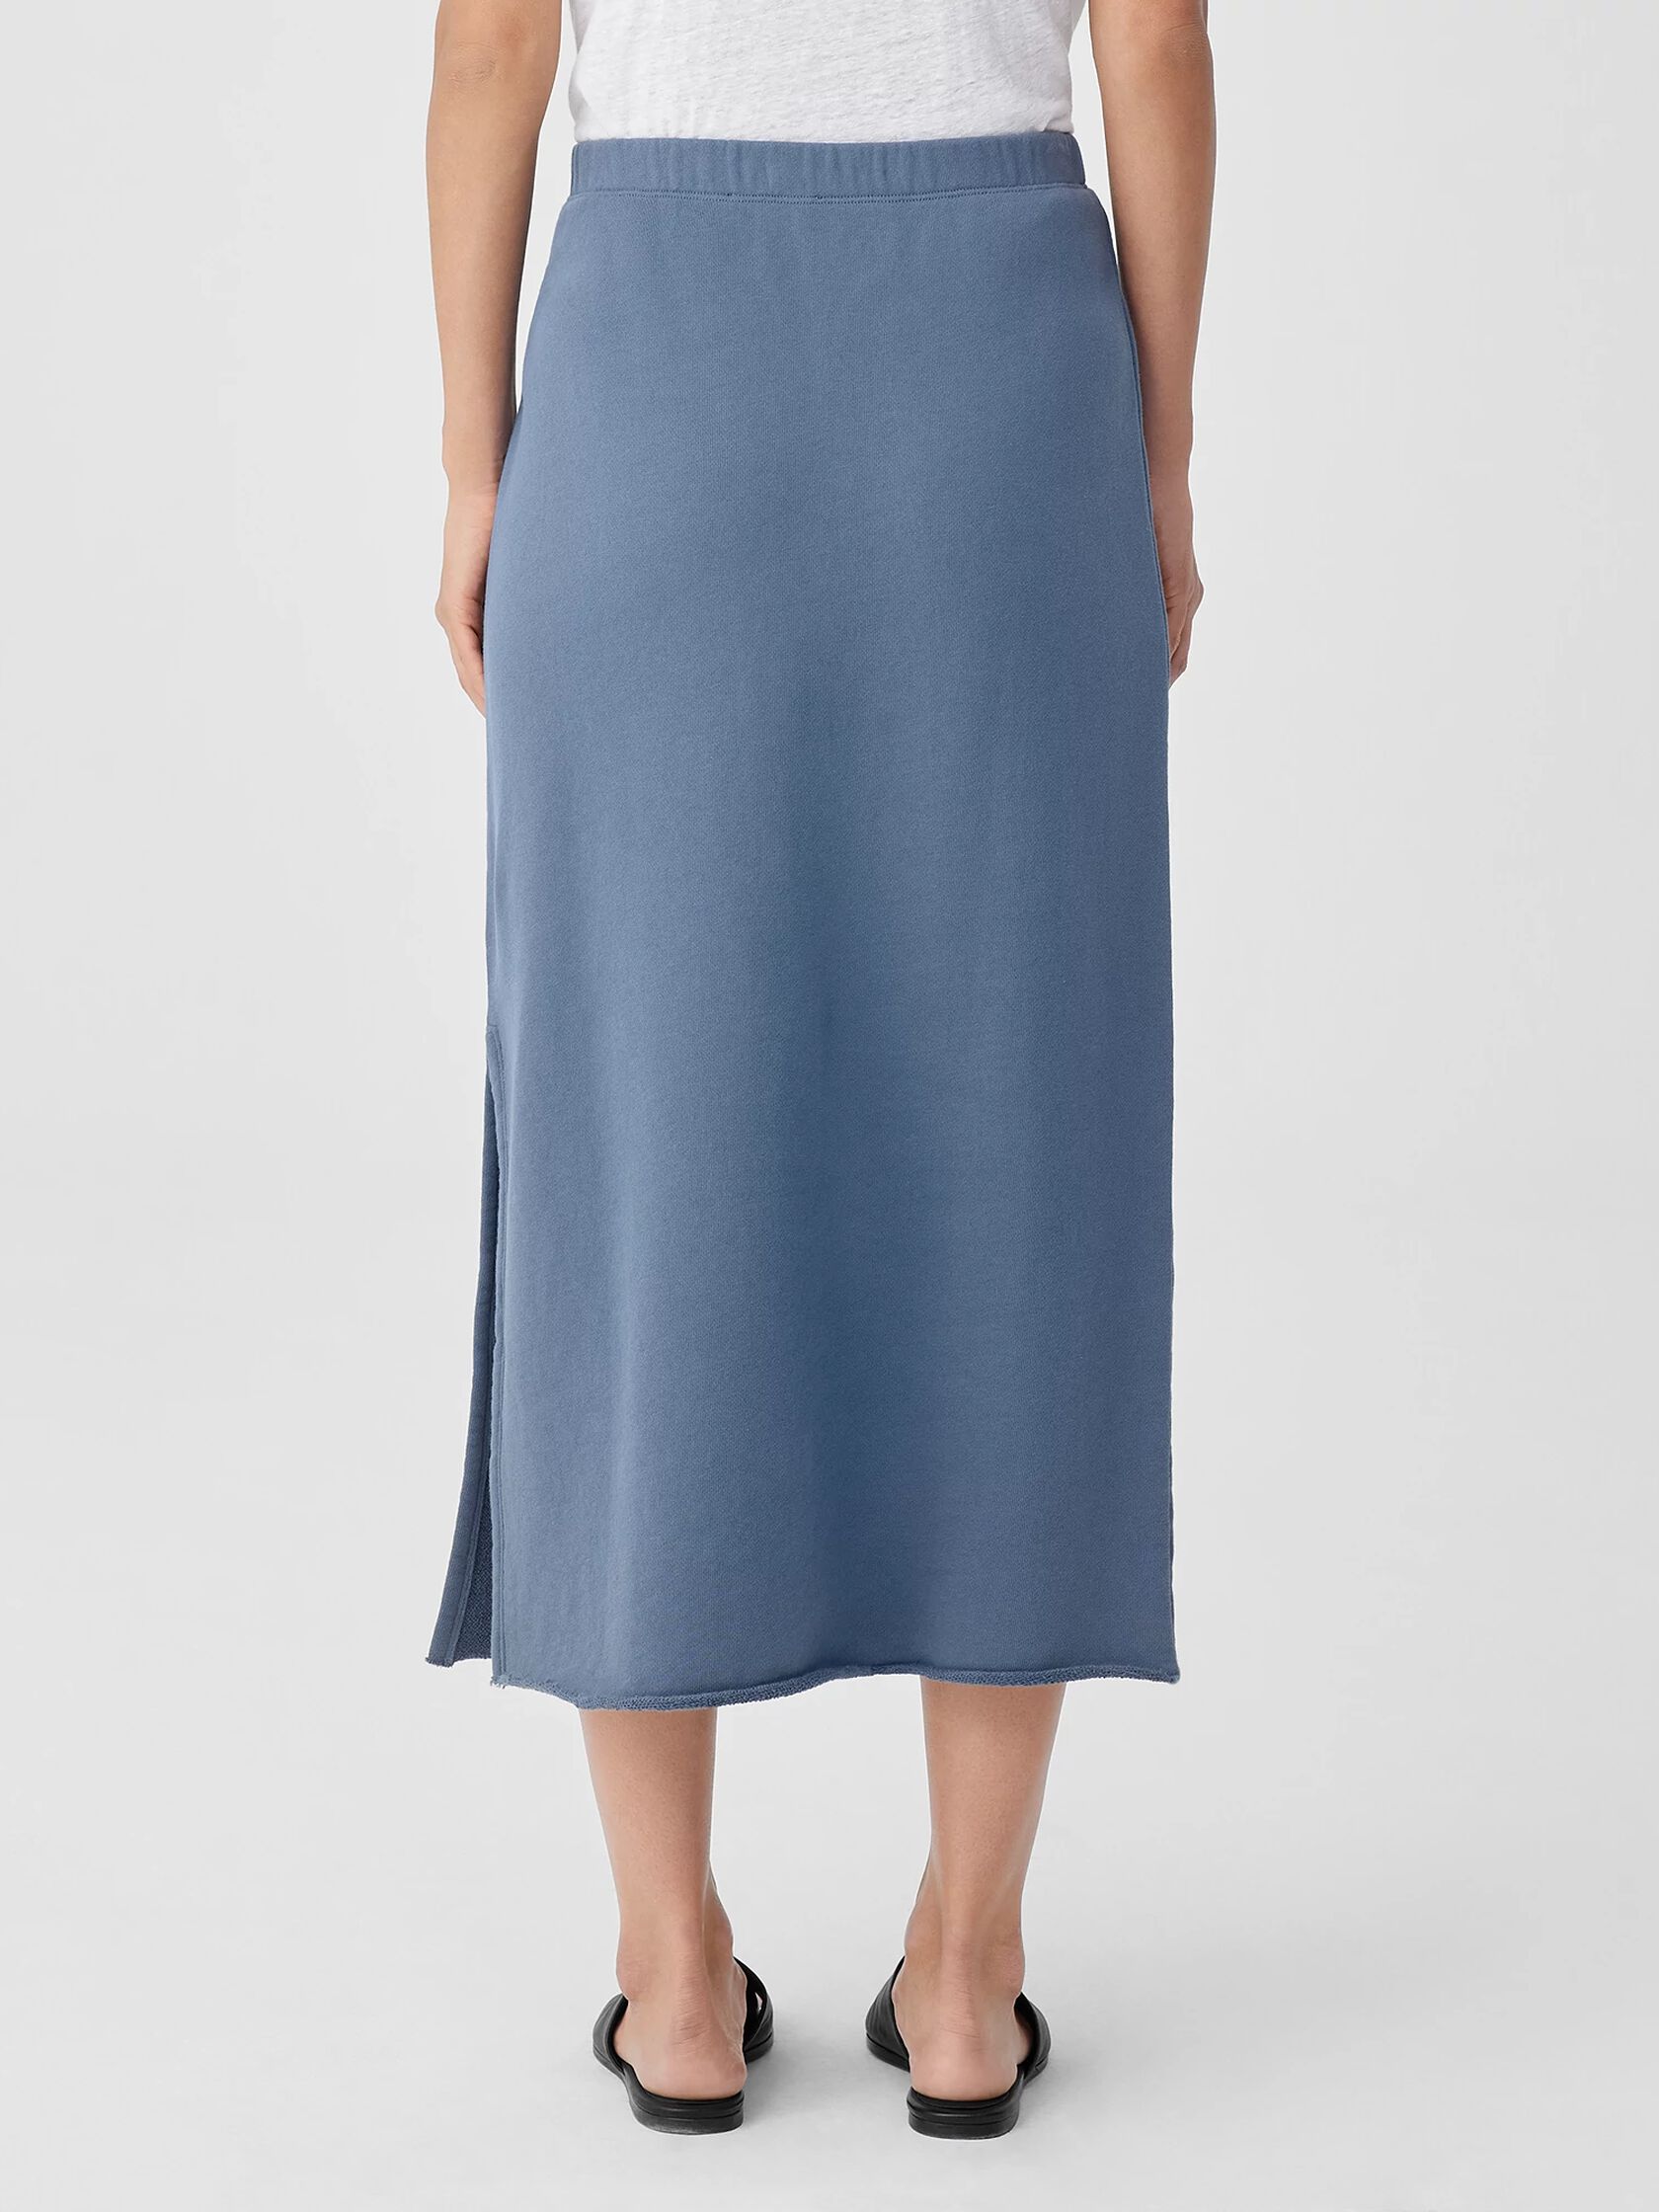 Organic Cotton French Terry A-Line Skirt | EILEEN FISHER